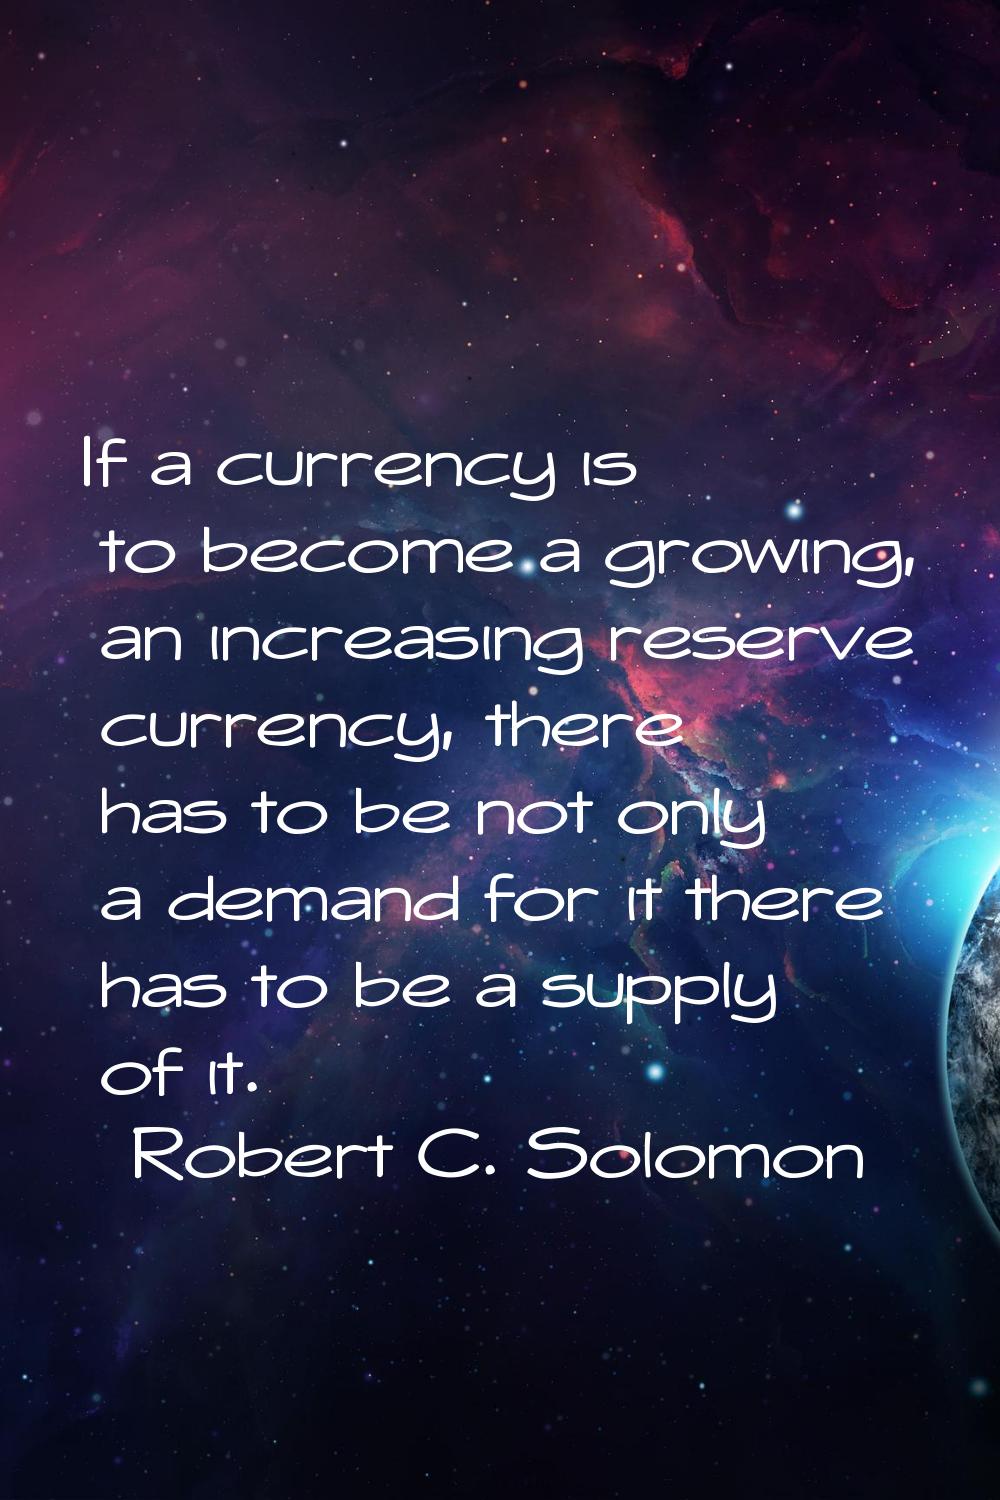 If a currency is to become a growing, an increasing reserve currency, there has to be not only a de